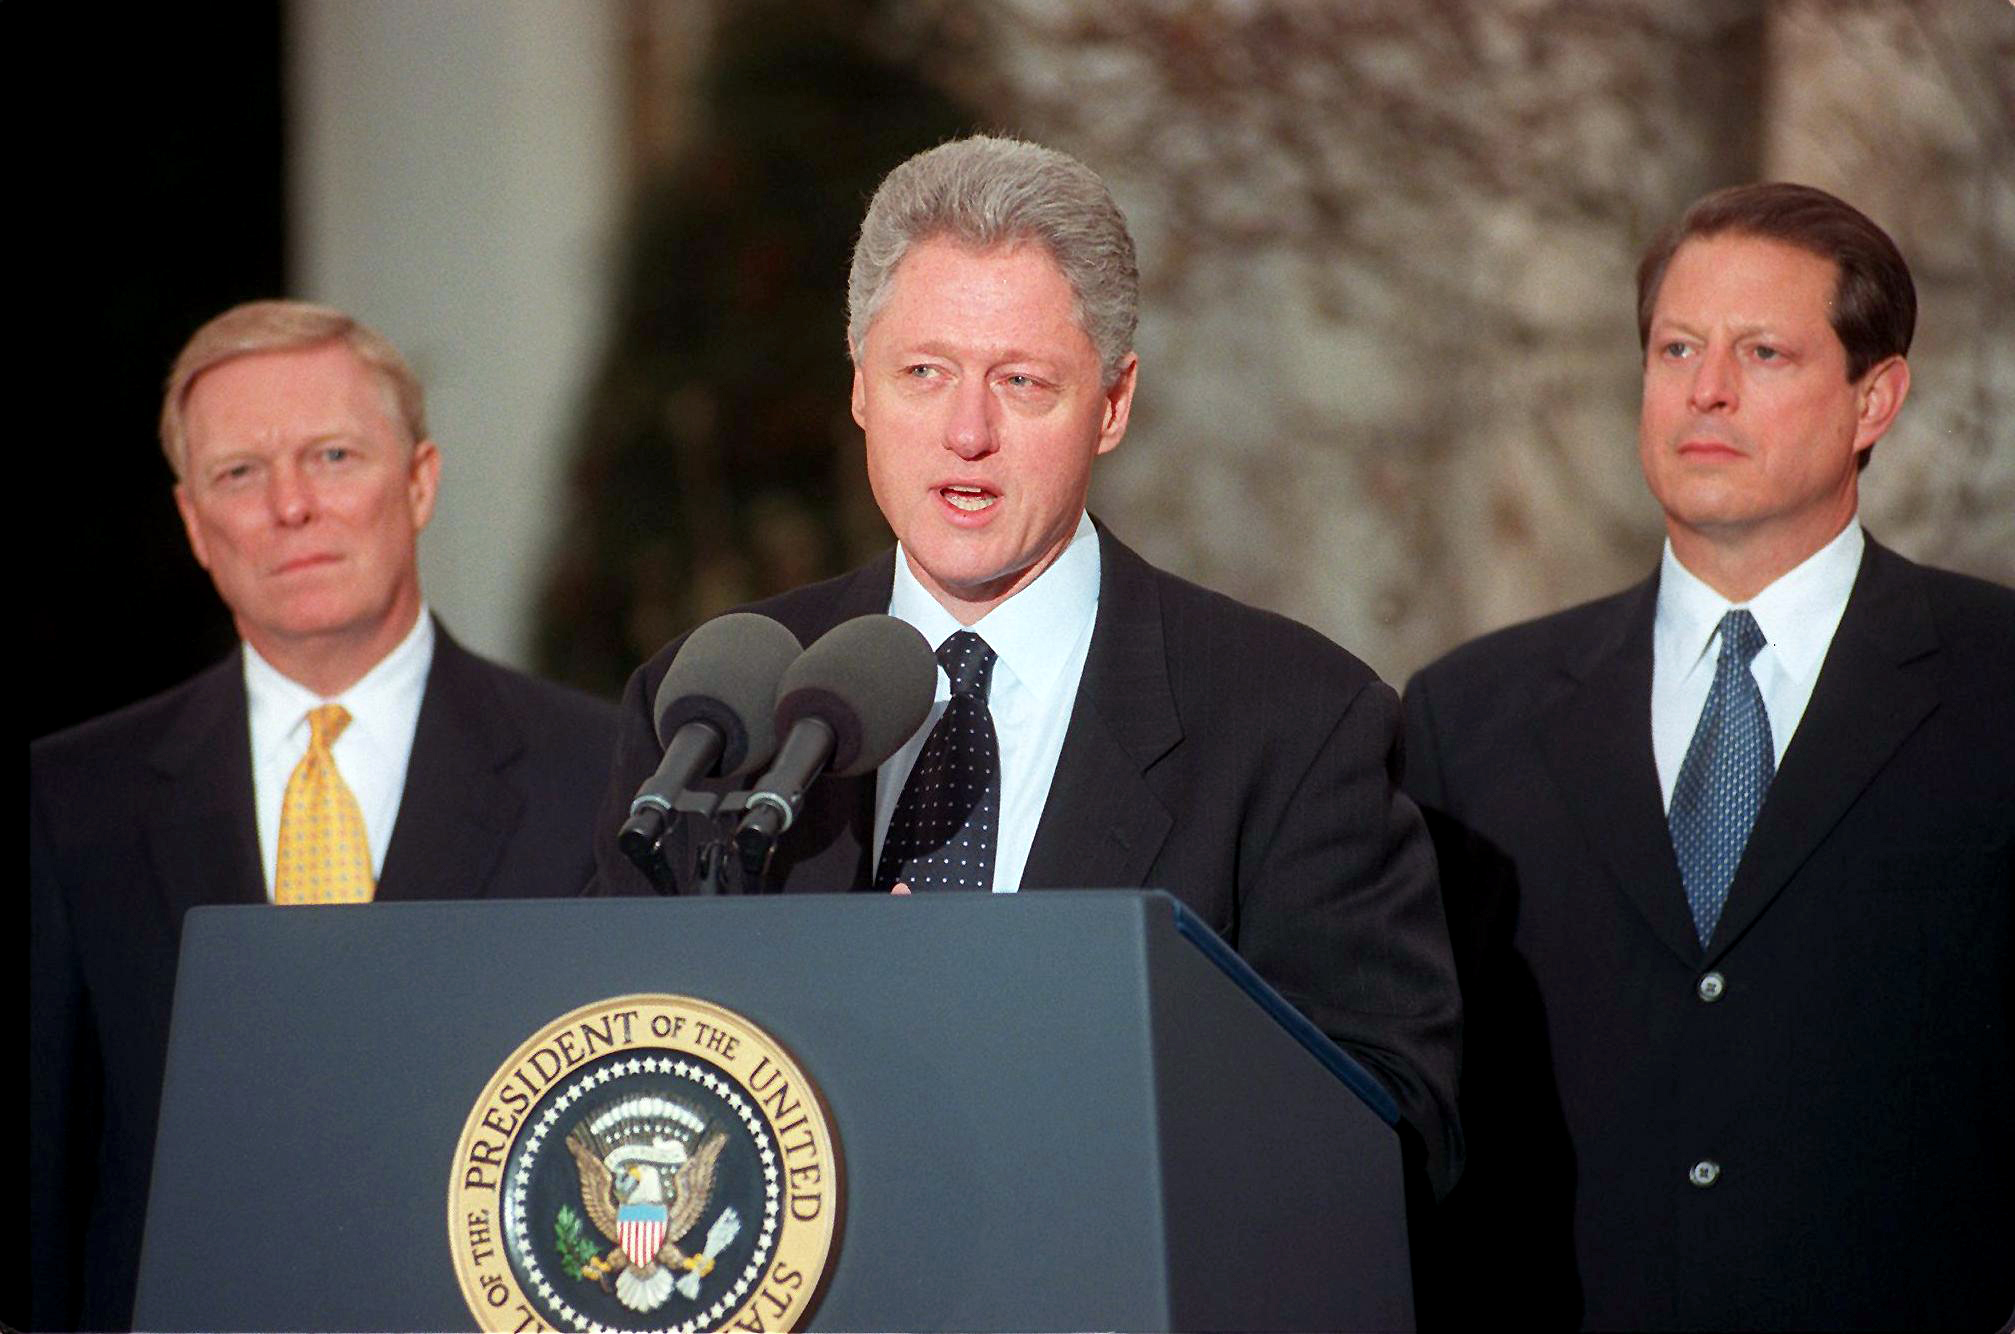 PHOTO: President Bill Clinton addresses the nation, Dec. 19, 1998, from the White House after the House of Representatives impeached him on charges of perjury and obstruction of justice.